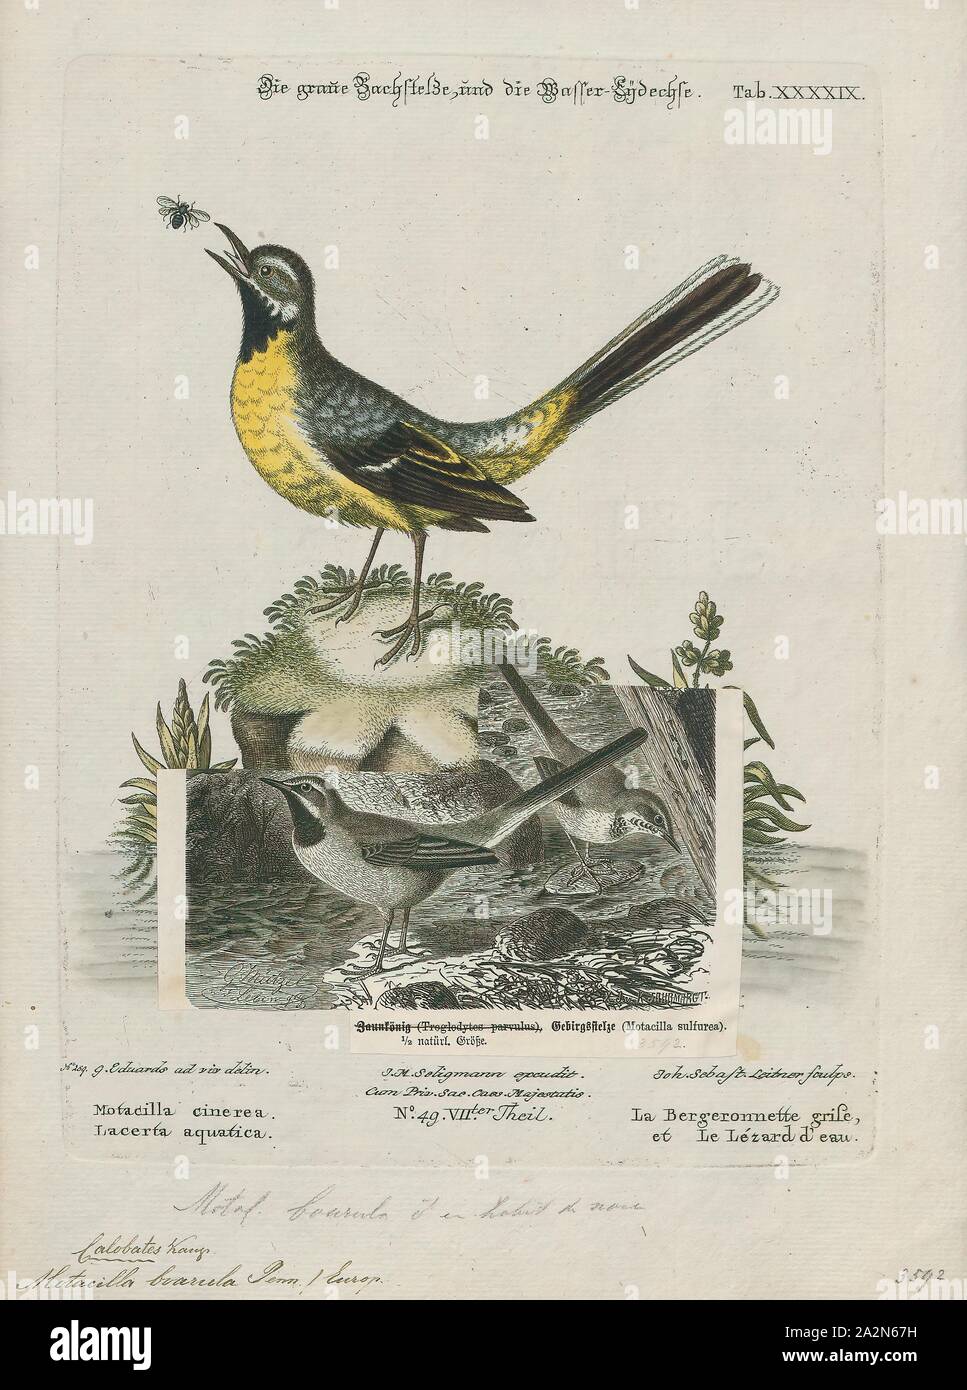 Motacilla boarula, Print, Wagtail, The wagtails are a genus, Motacilla, of passerine birds in the family Motacillidae. The forest wagtail belongs to the monotypic genus Dendronanthus which is closely related to Motacilla and sometimes included herein. The common name and genus names are derived from their characteristic tail pumping behaviour. Together with the pipits and longclaws they form the family Motacillidae., 1700-1880 Stock Photo